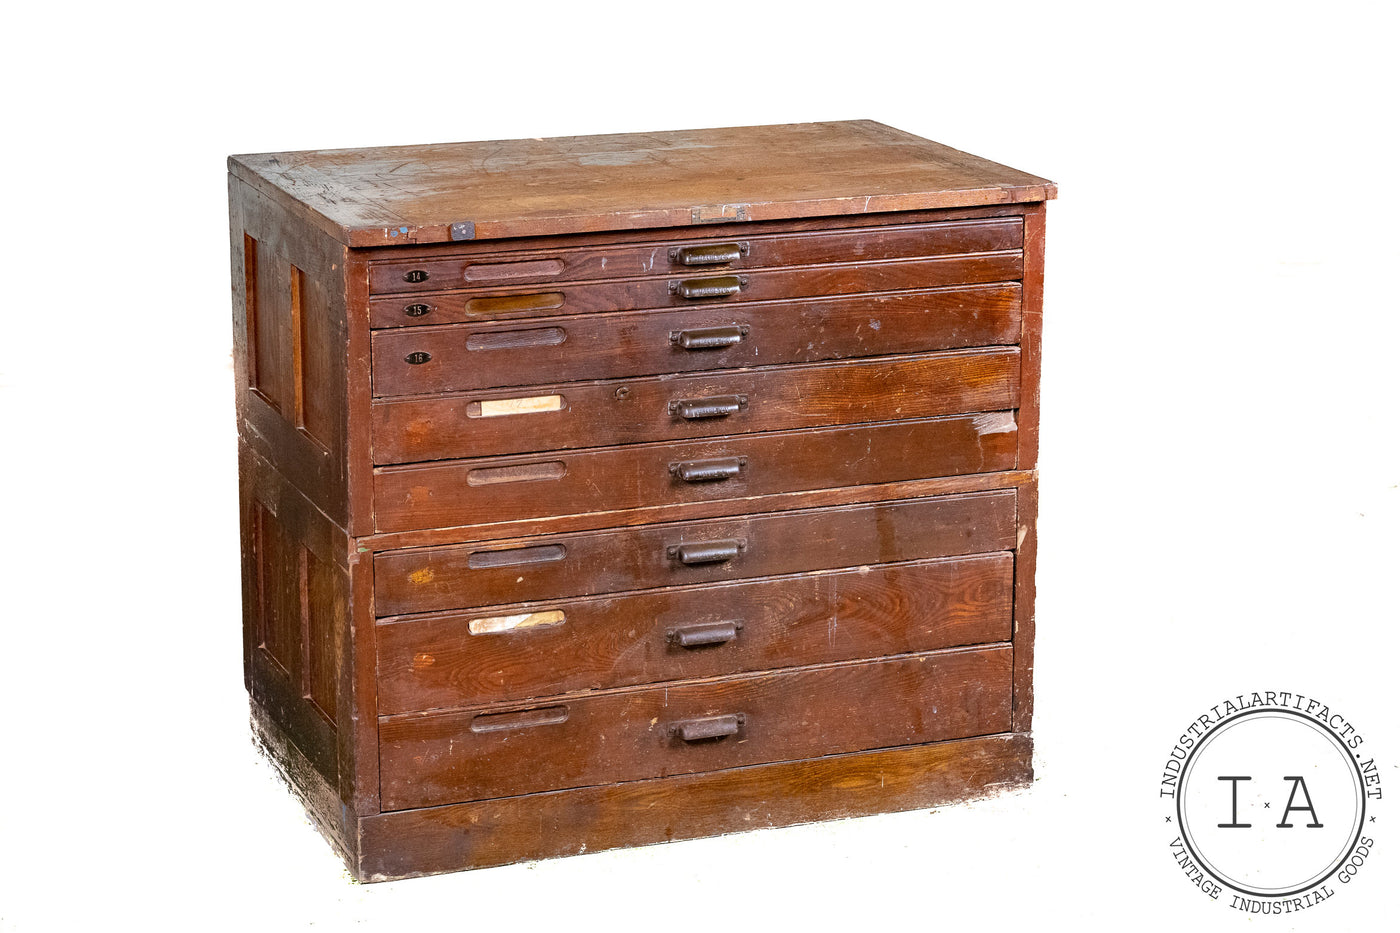 C. Early 1900s Hamilton Flat File Typeface Printers Cabinet